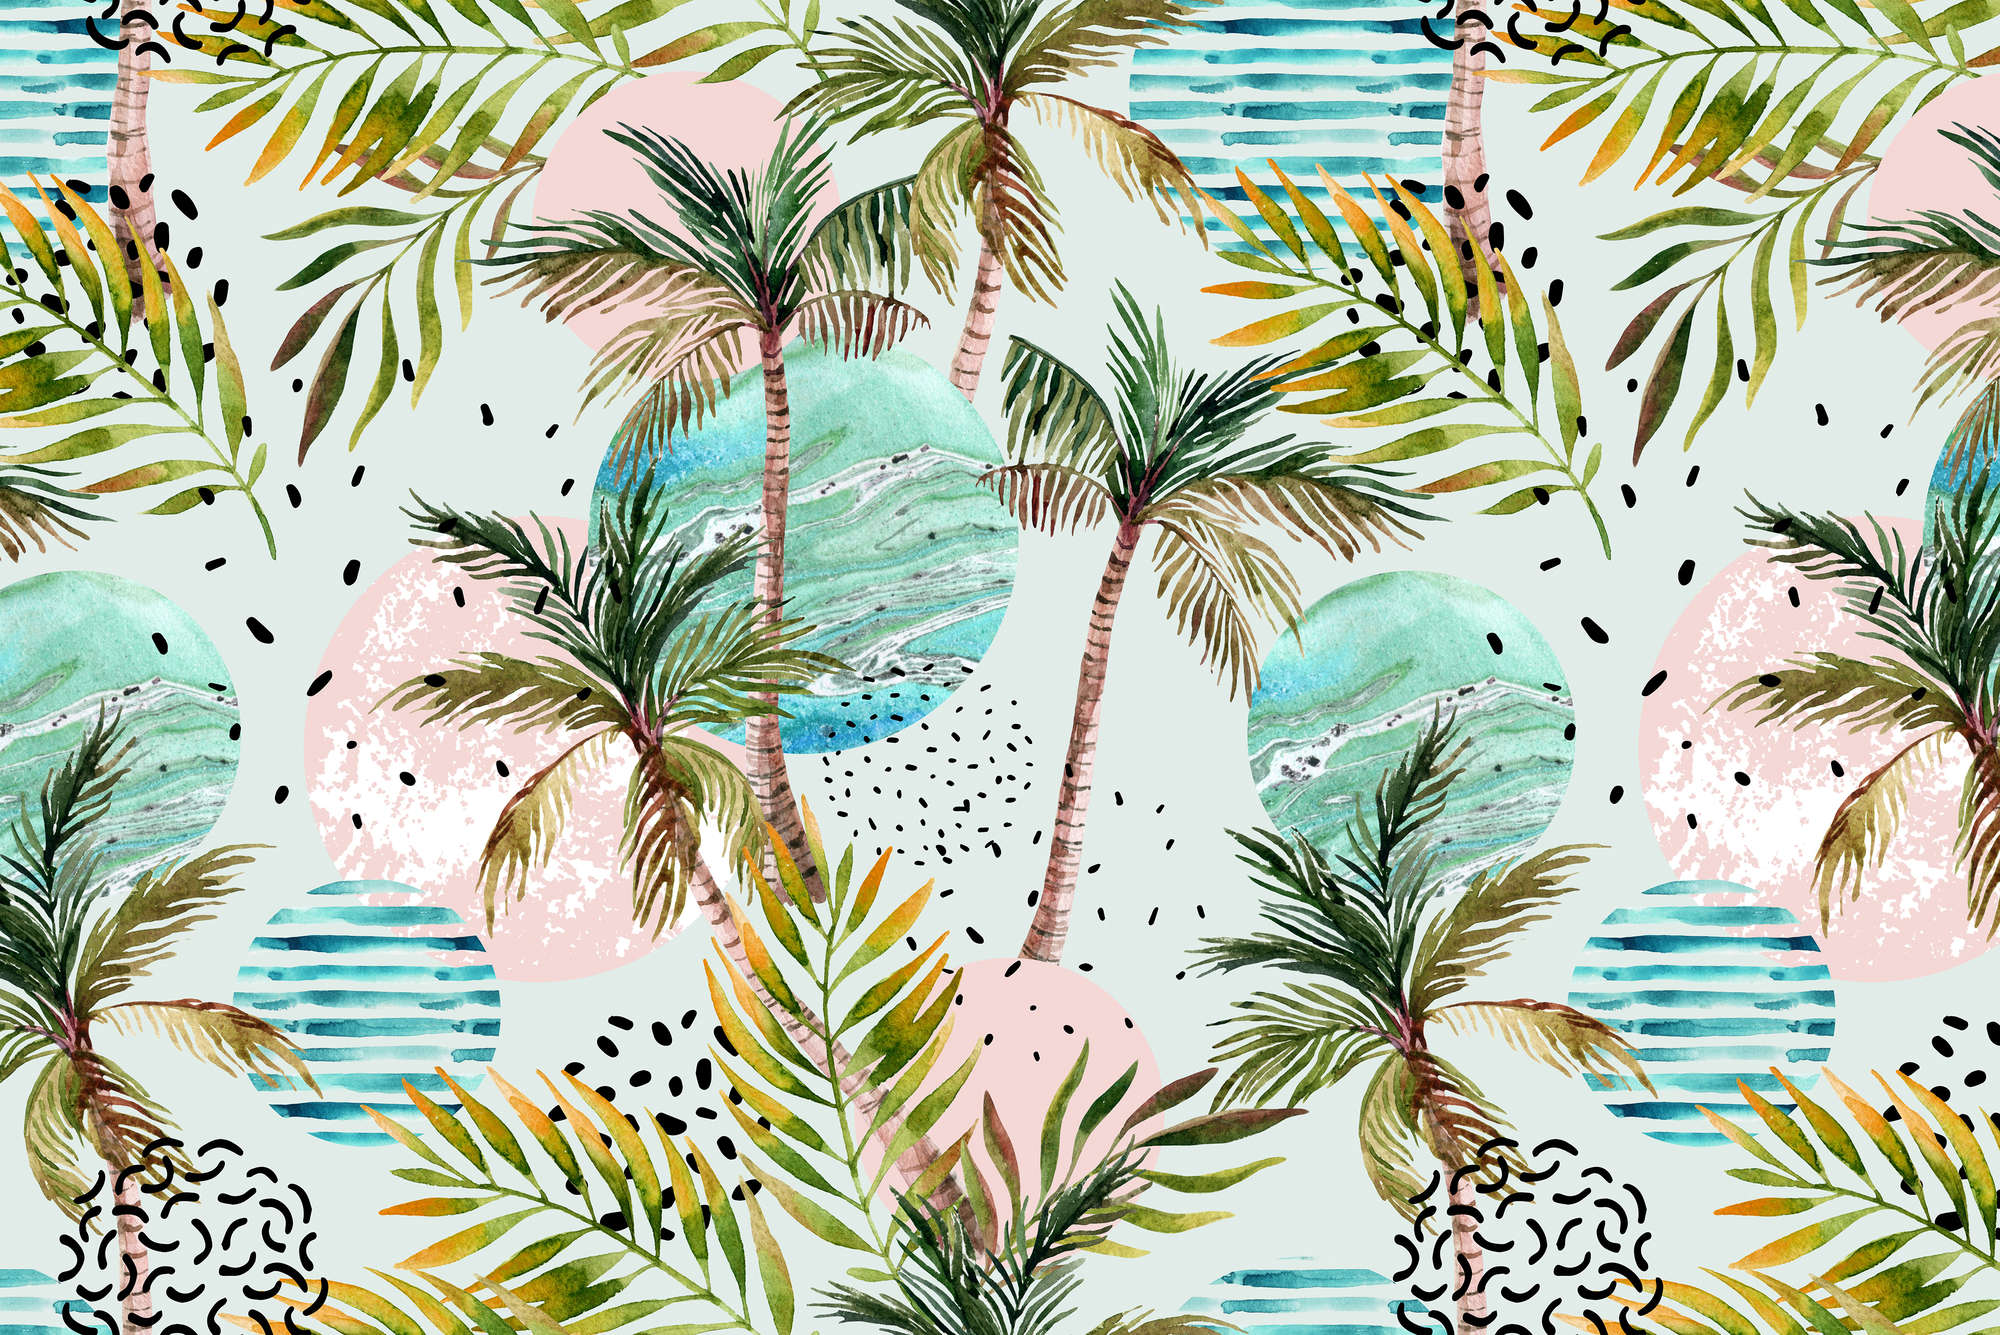             Graphic mural palm trees with wave symbols on premium smooth nonwoven
        